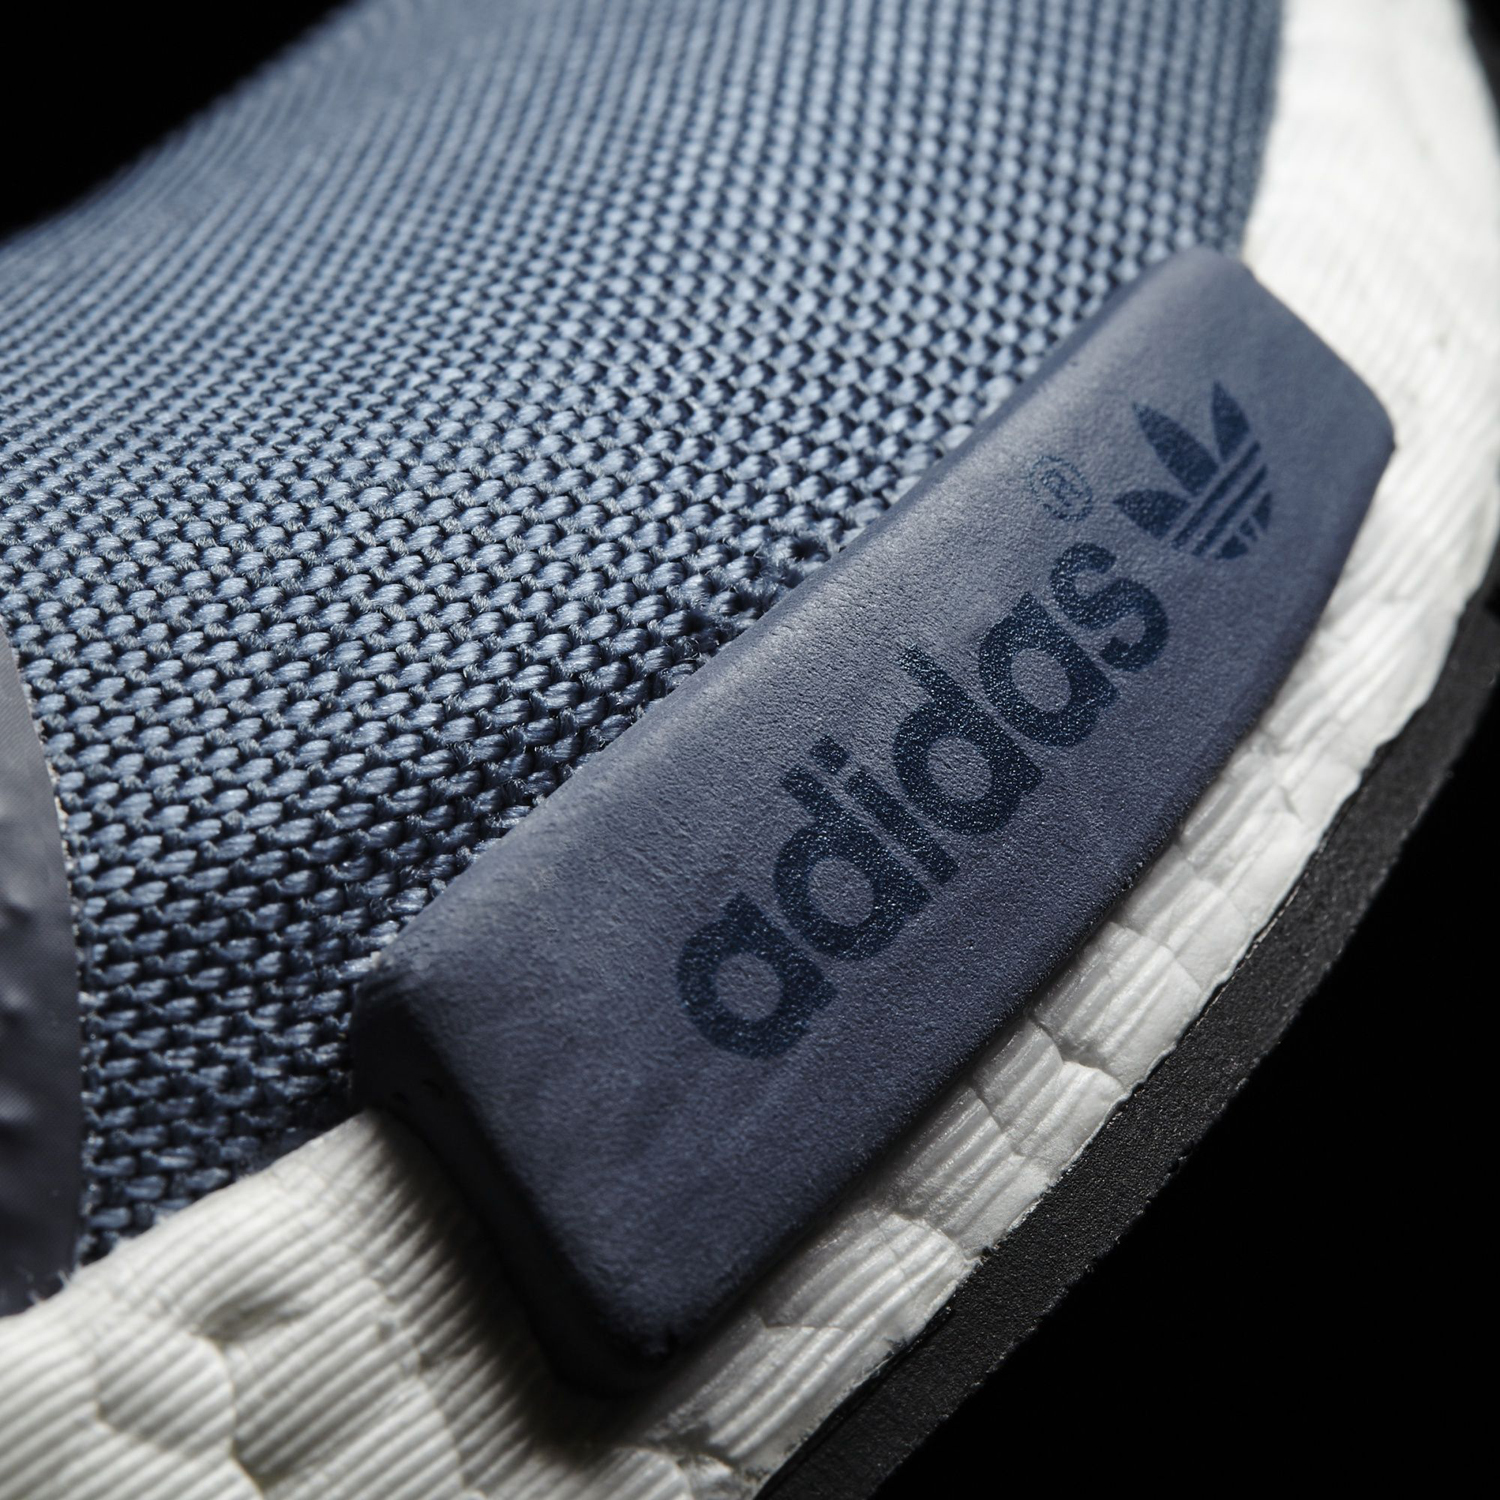 Adidas NMD Blue Suede Toe Detail